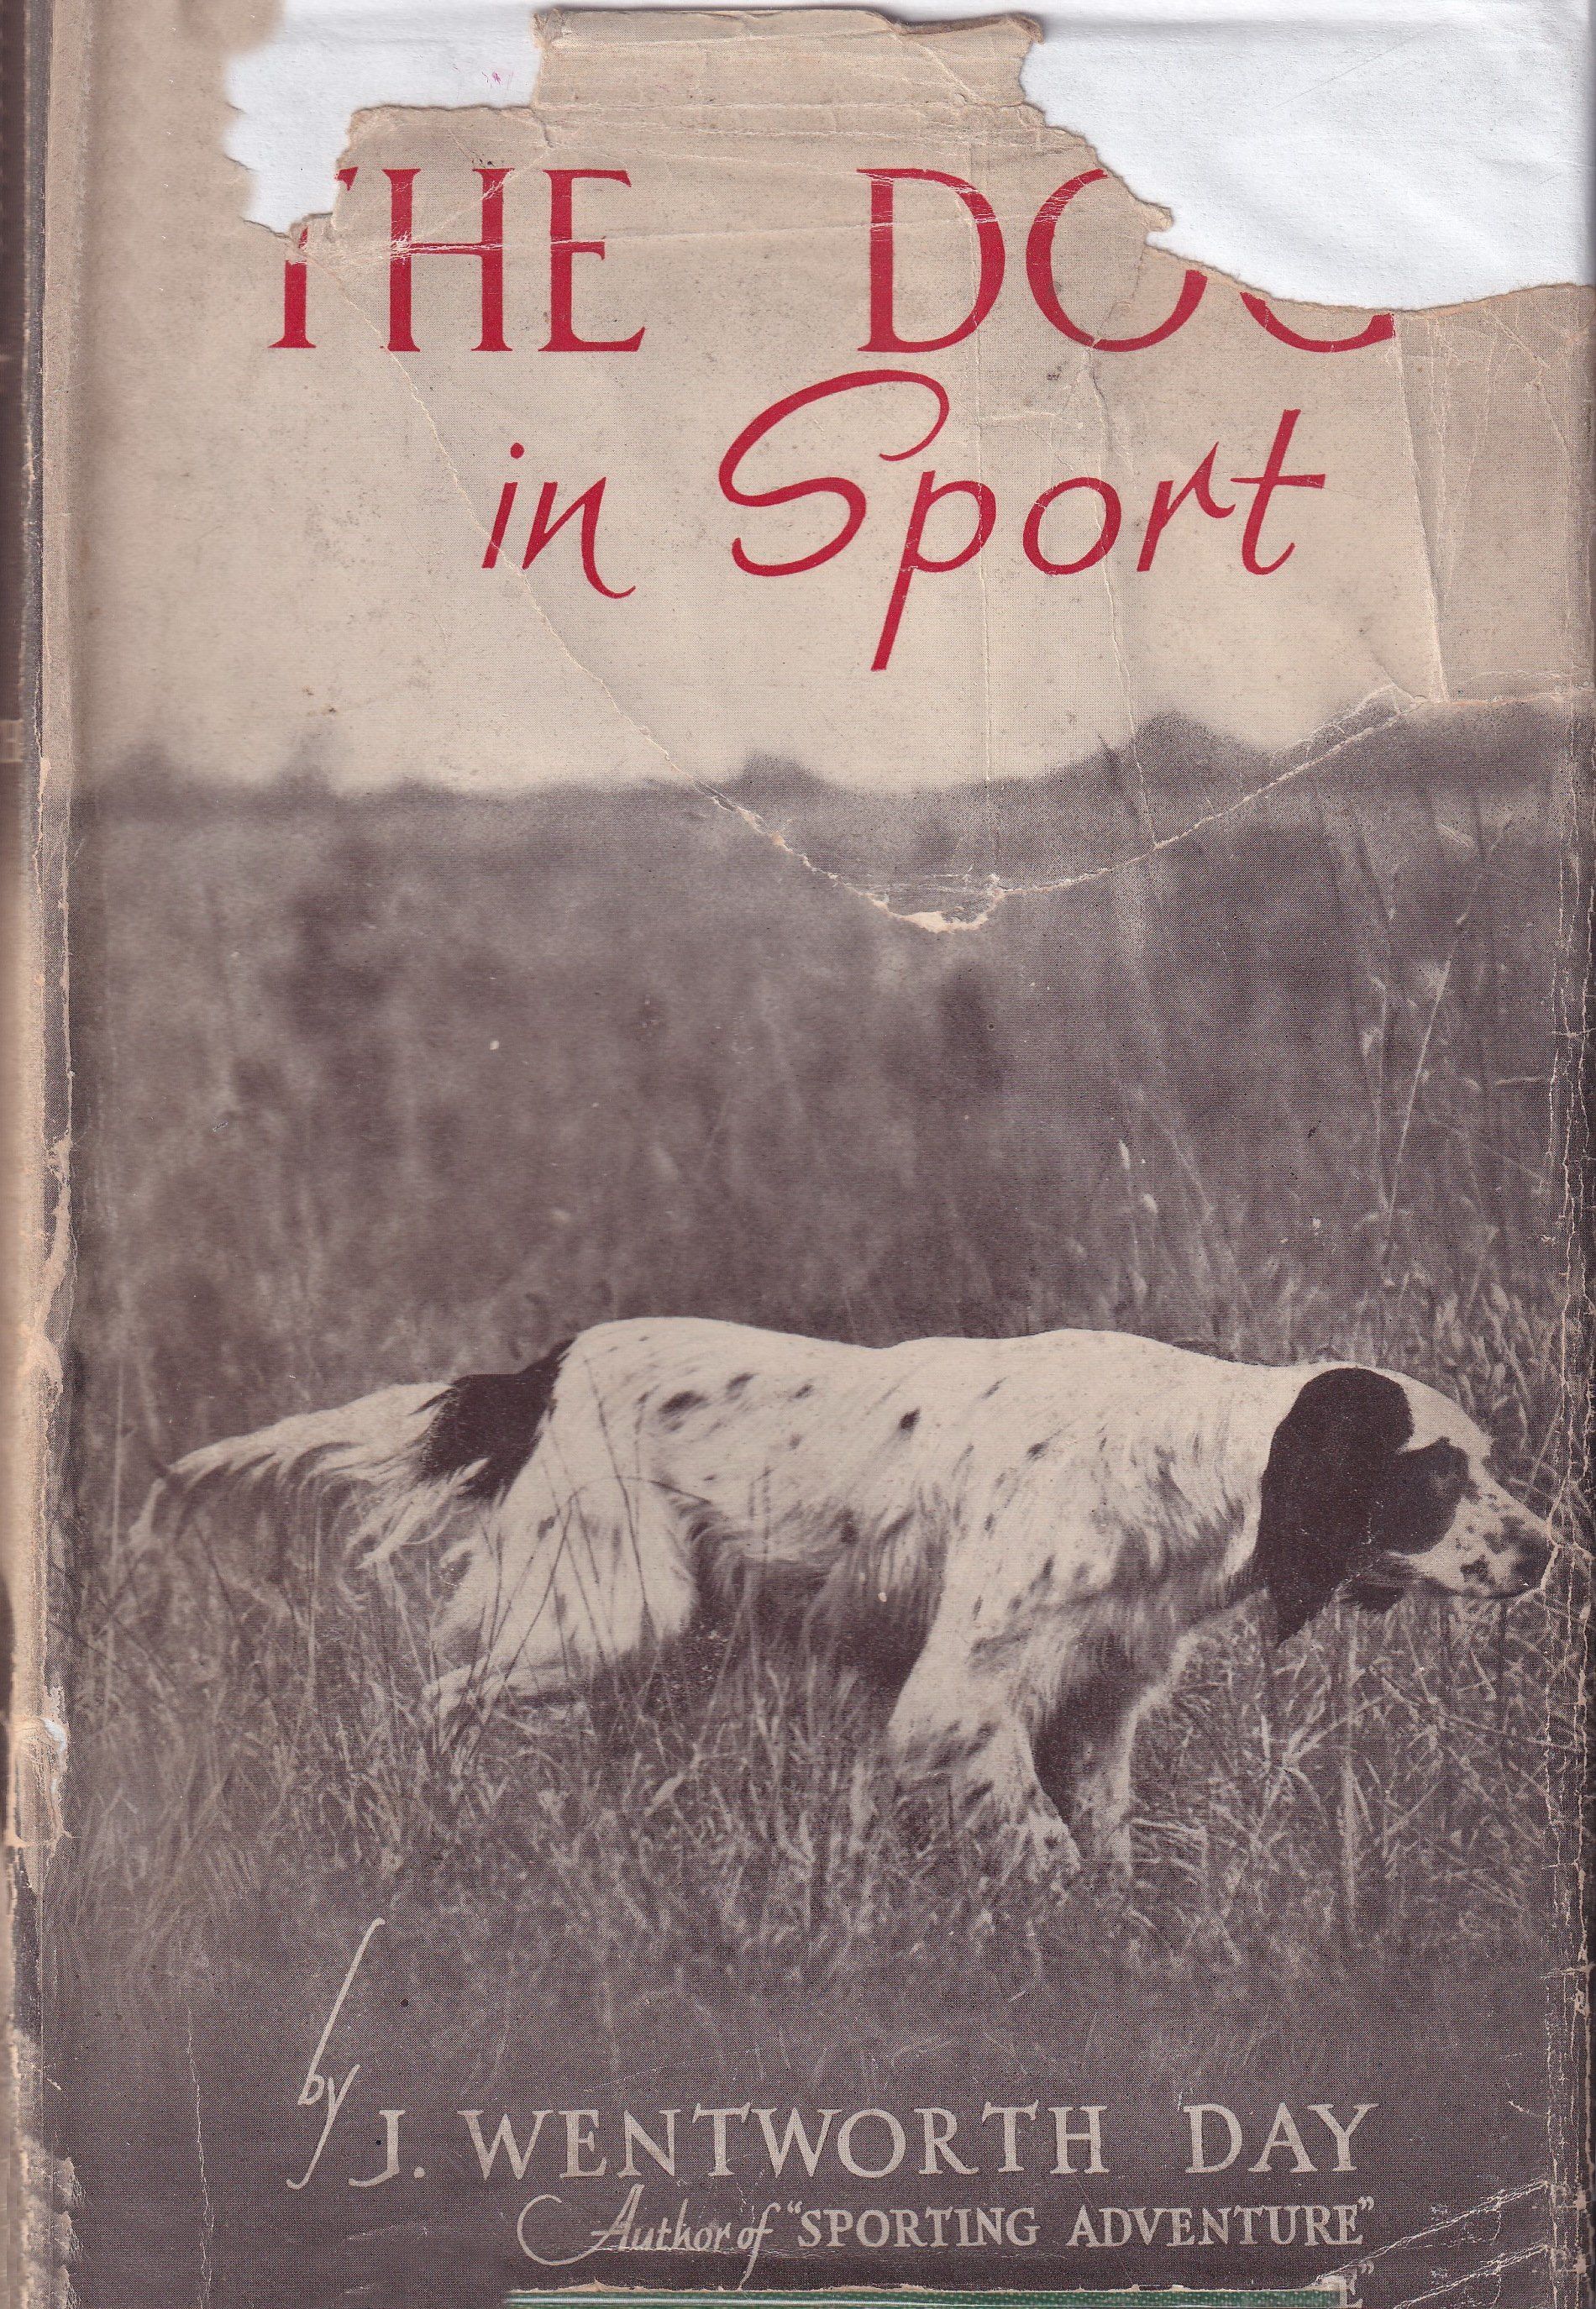 The Dog in Sport by J Wentworth-Day